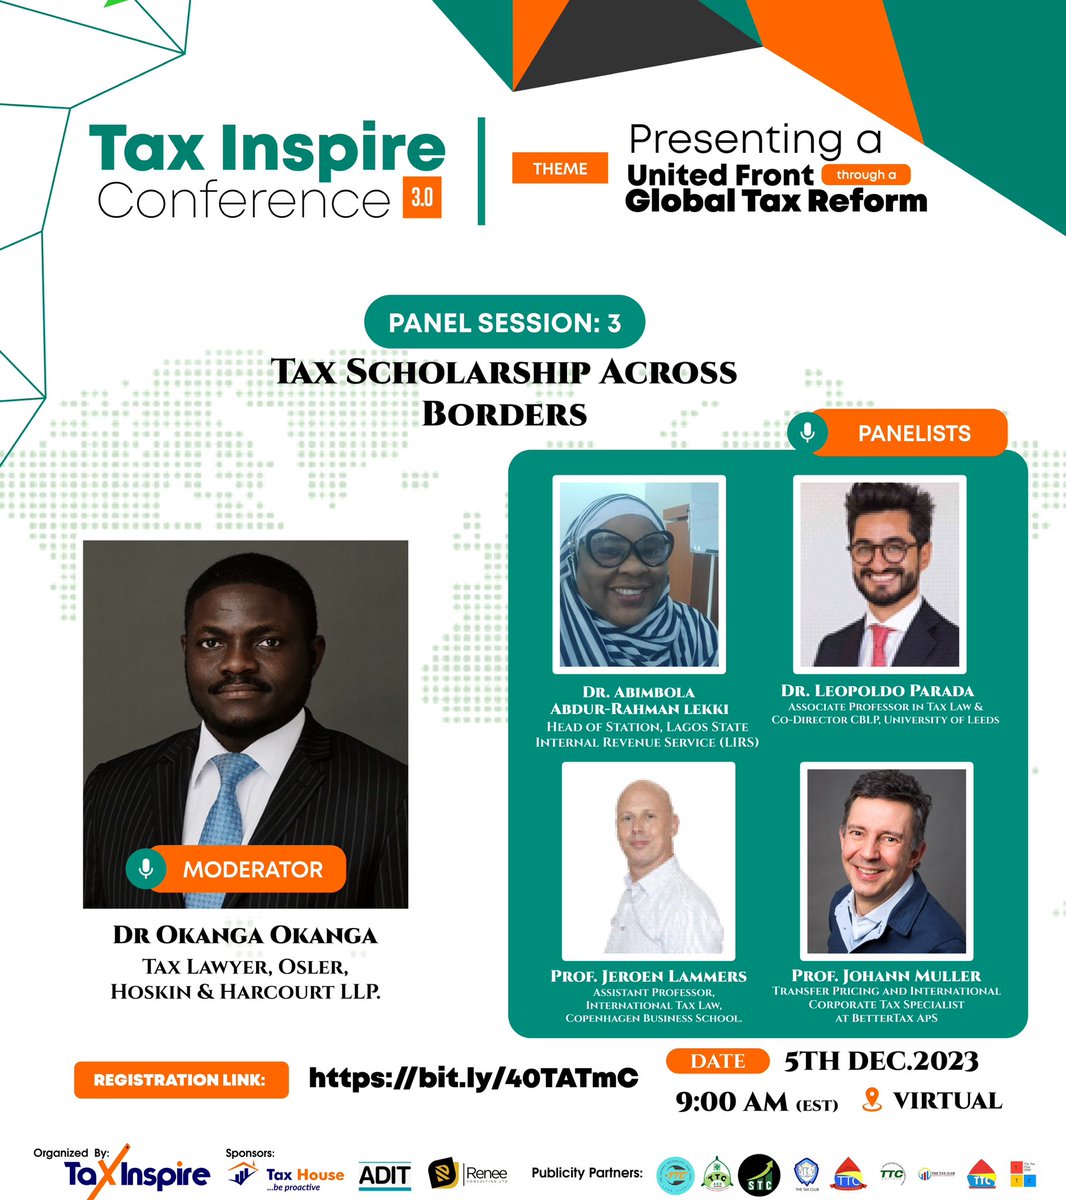 MEET OUR PANELISTS It is time to meet our distinguished speakers for the biggest international tax conference of the year: Tax Inspire Conference 3.0. These remarkable tax experts will be panellist for the plenary session on “Tax Scholarship Across Borders'.